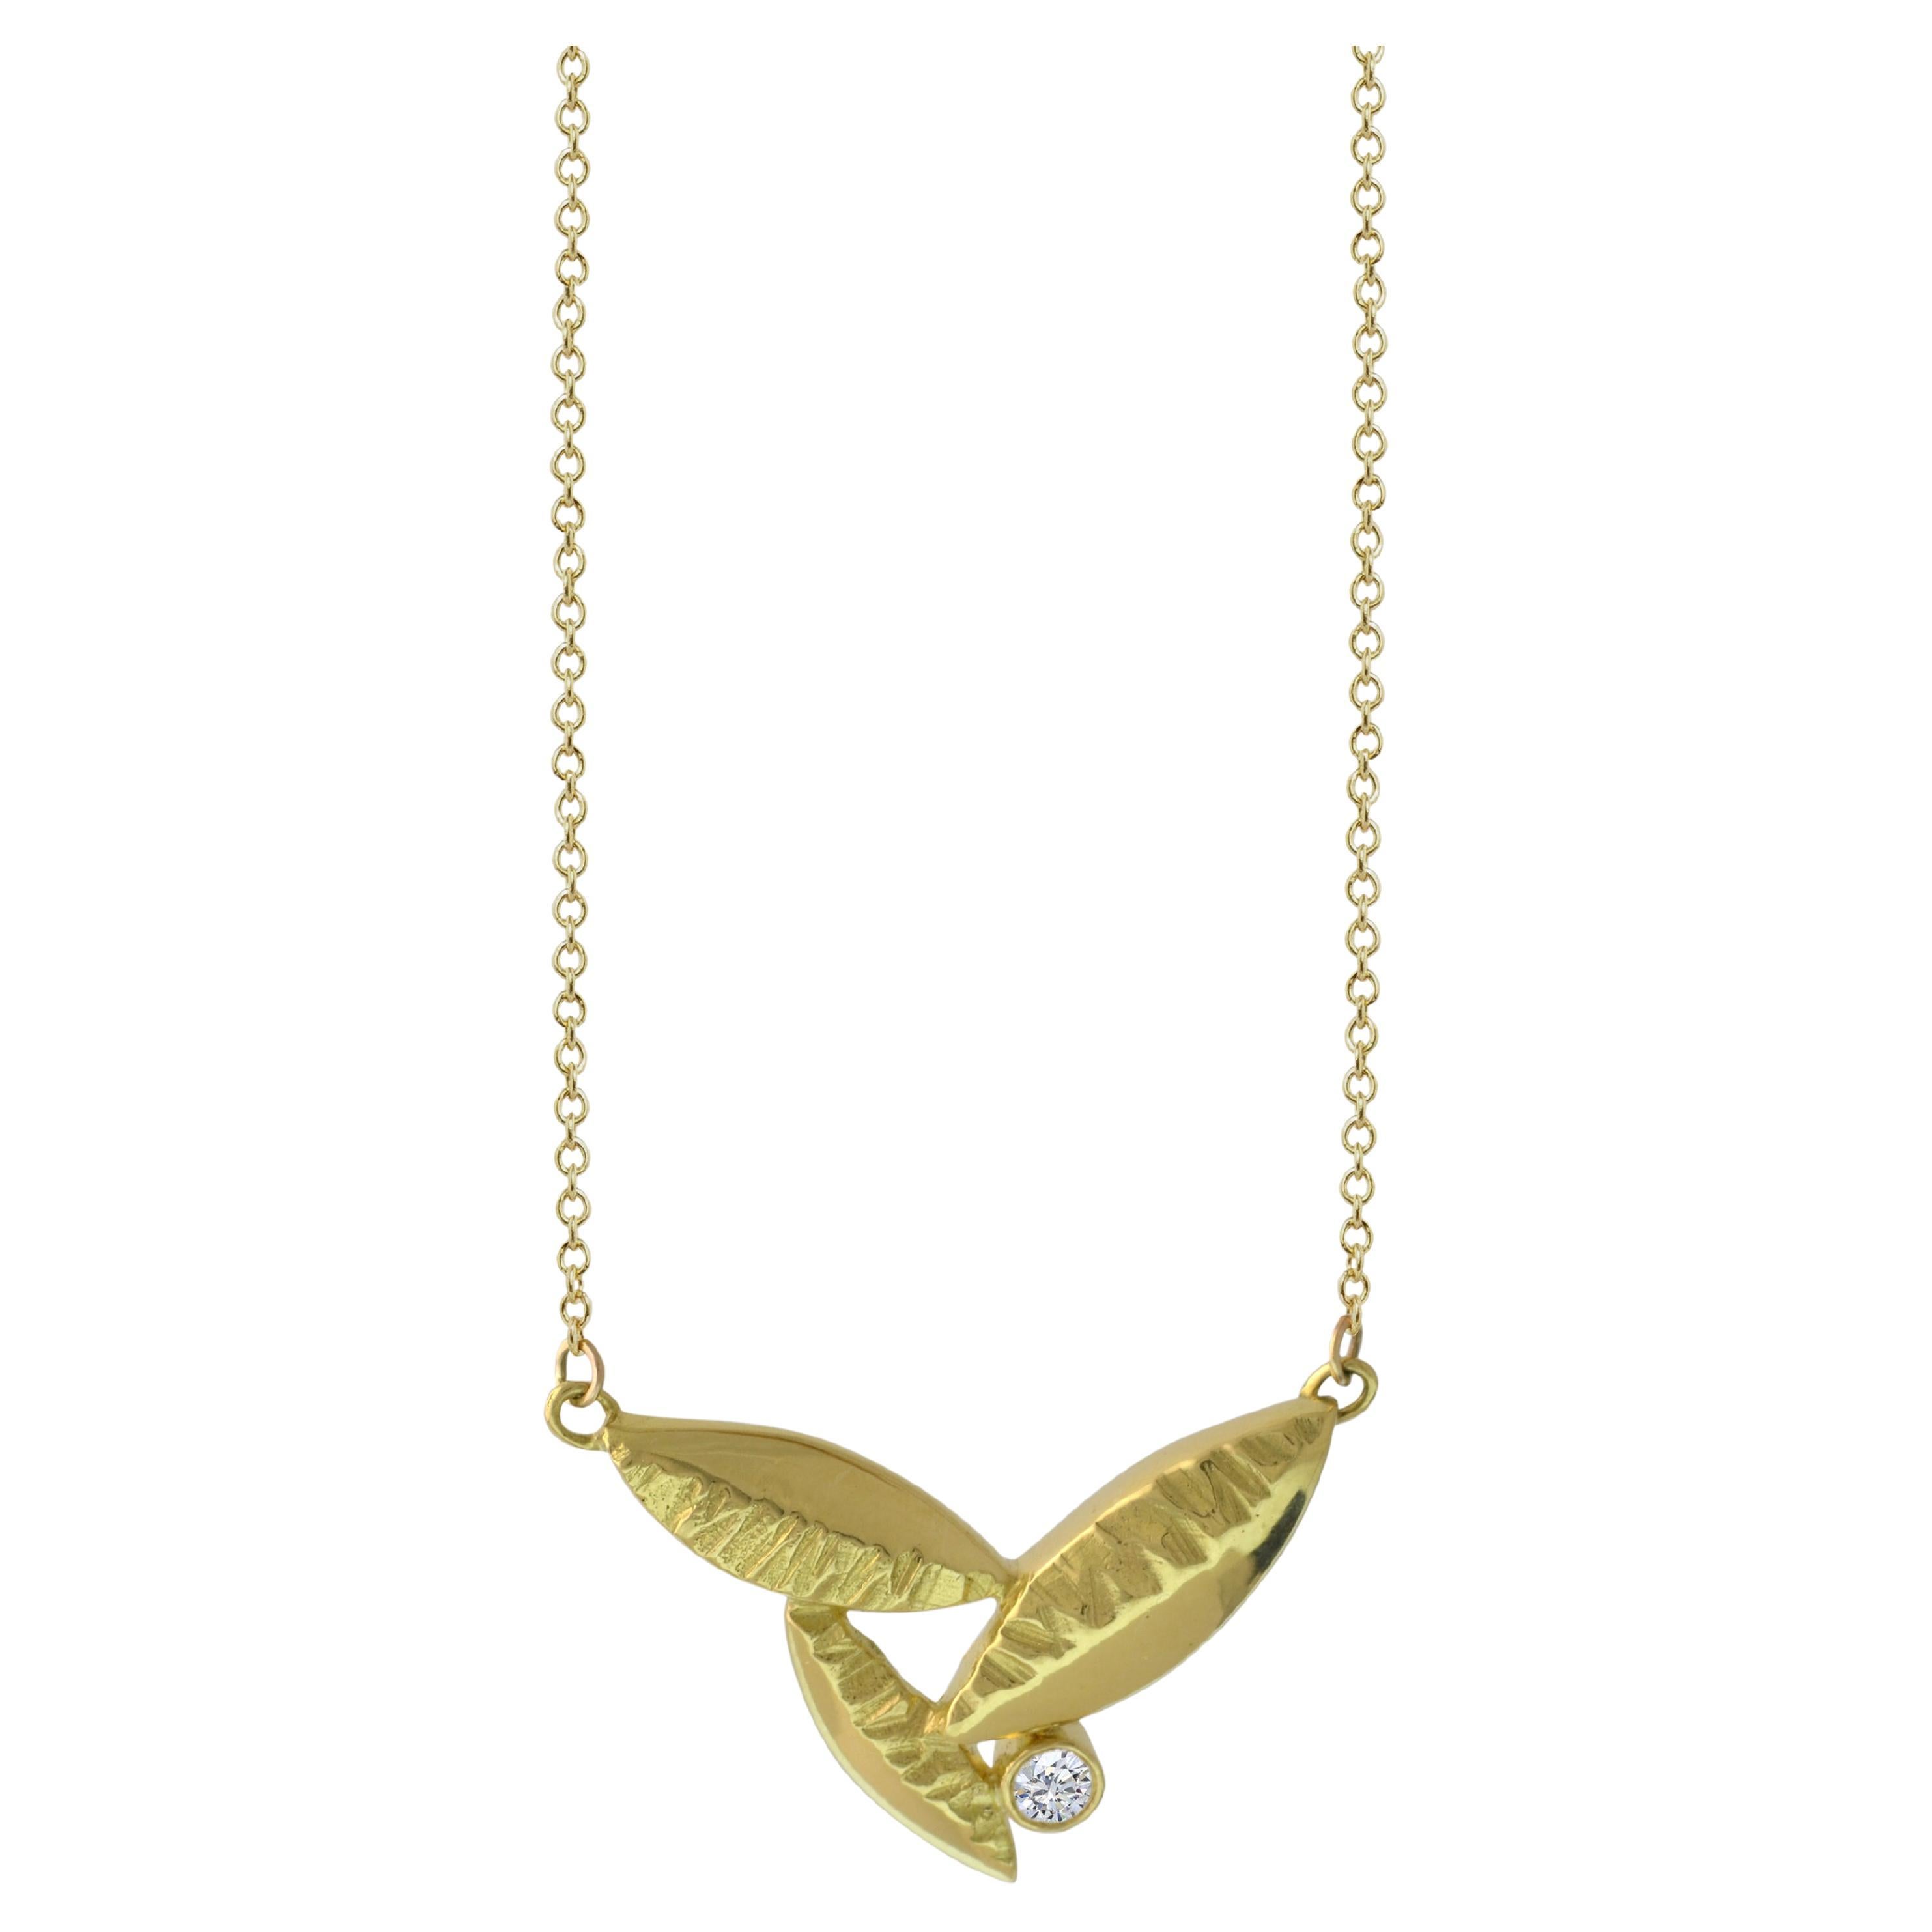 Contemporary Susan Crow Studio 18kt Fairmined Yellow Gold and Diamond Flora Leaf Pendant For Sale